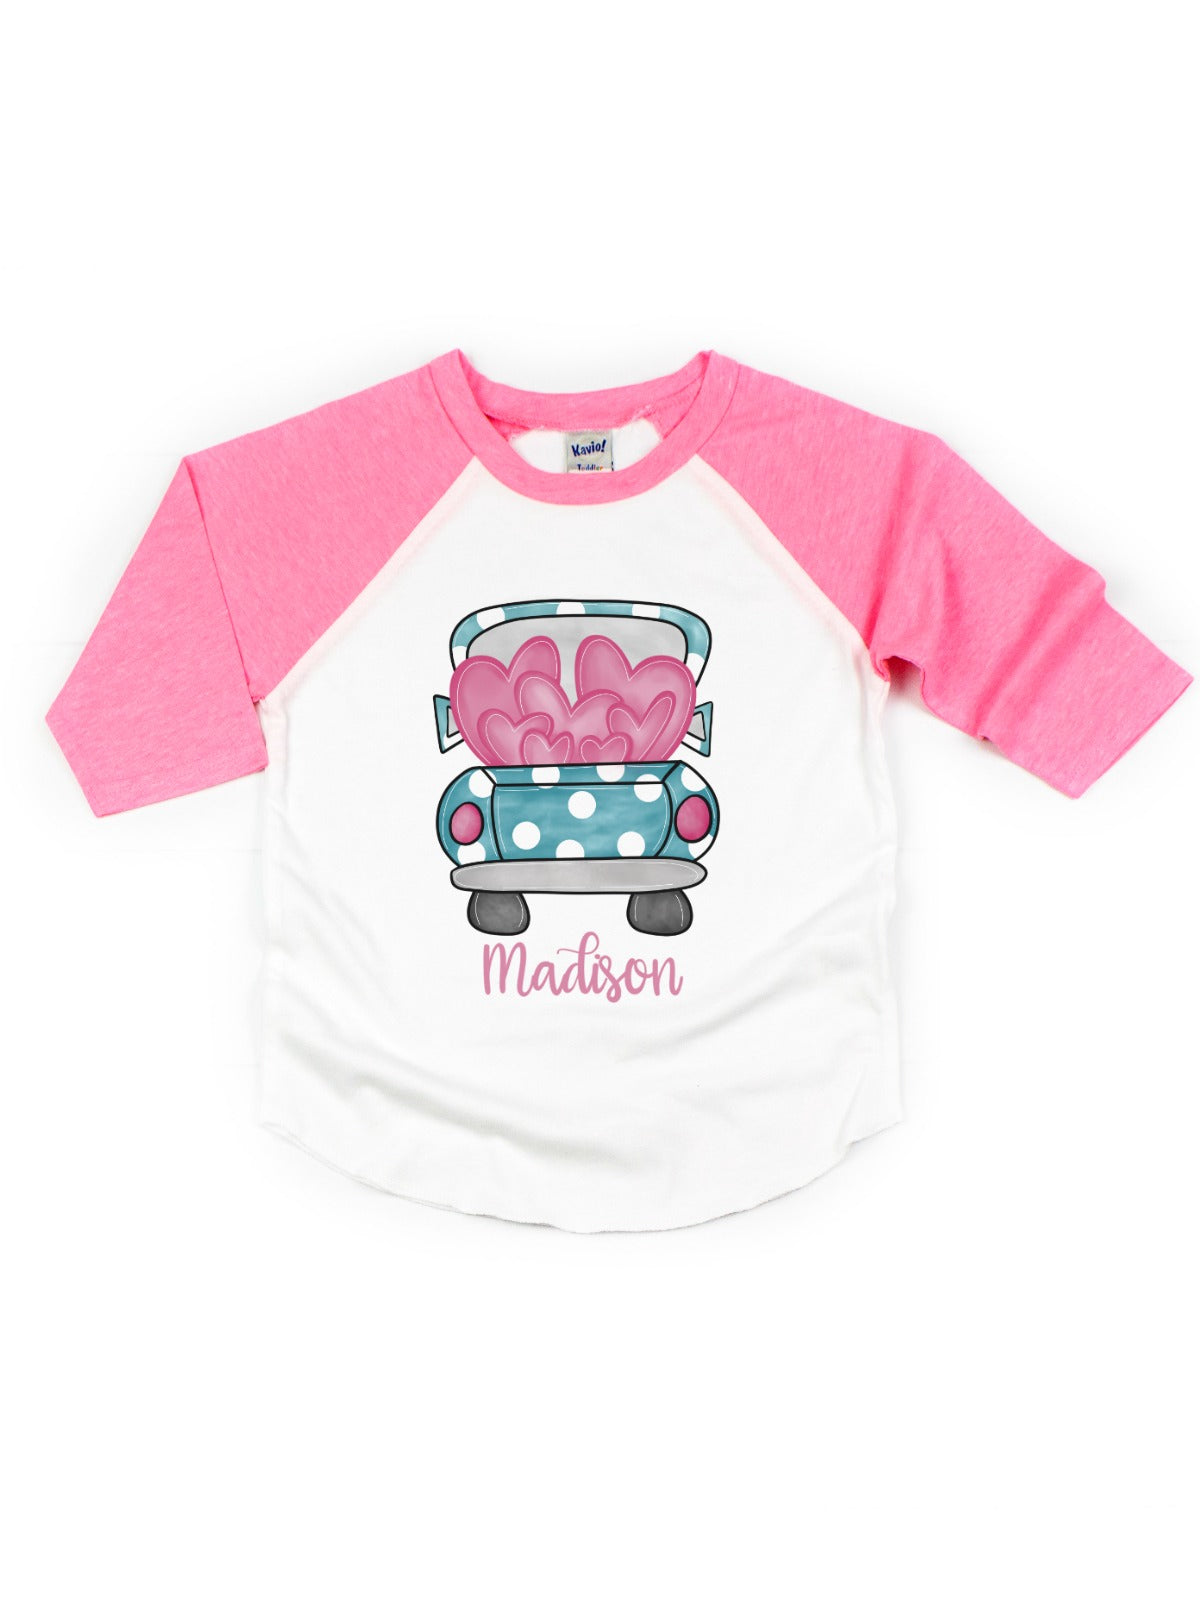 personalized girl's Valentine's Day t-shirt